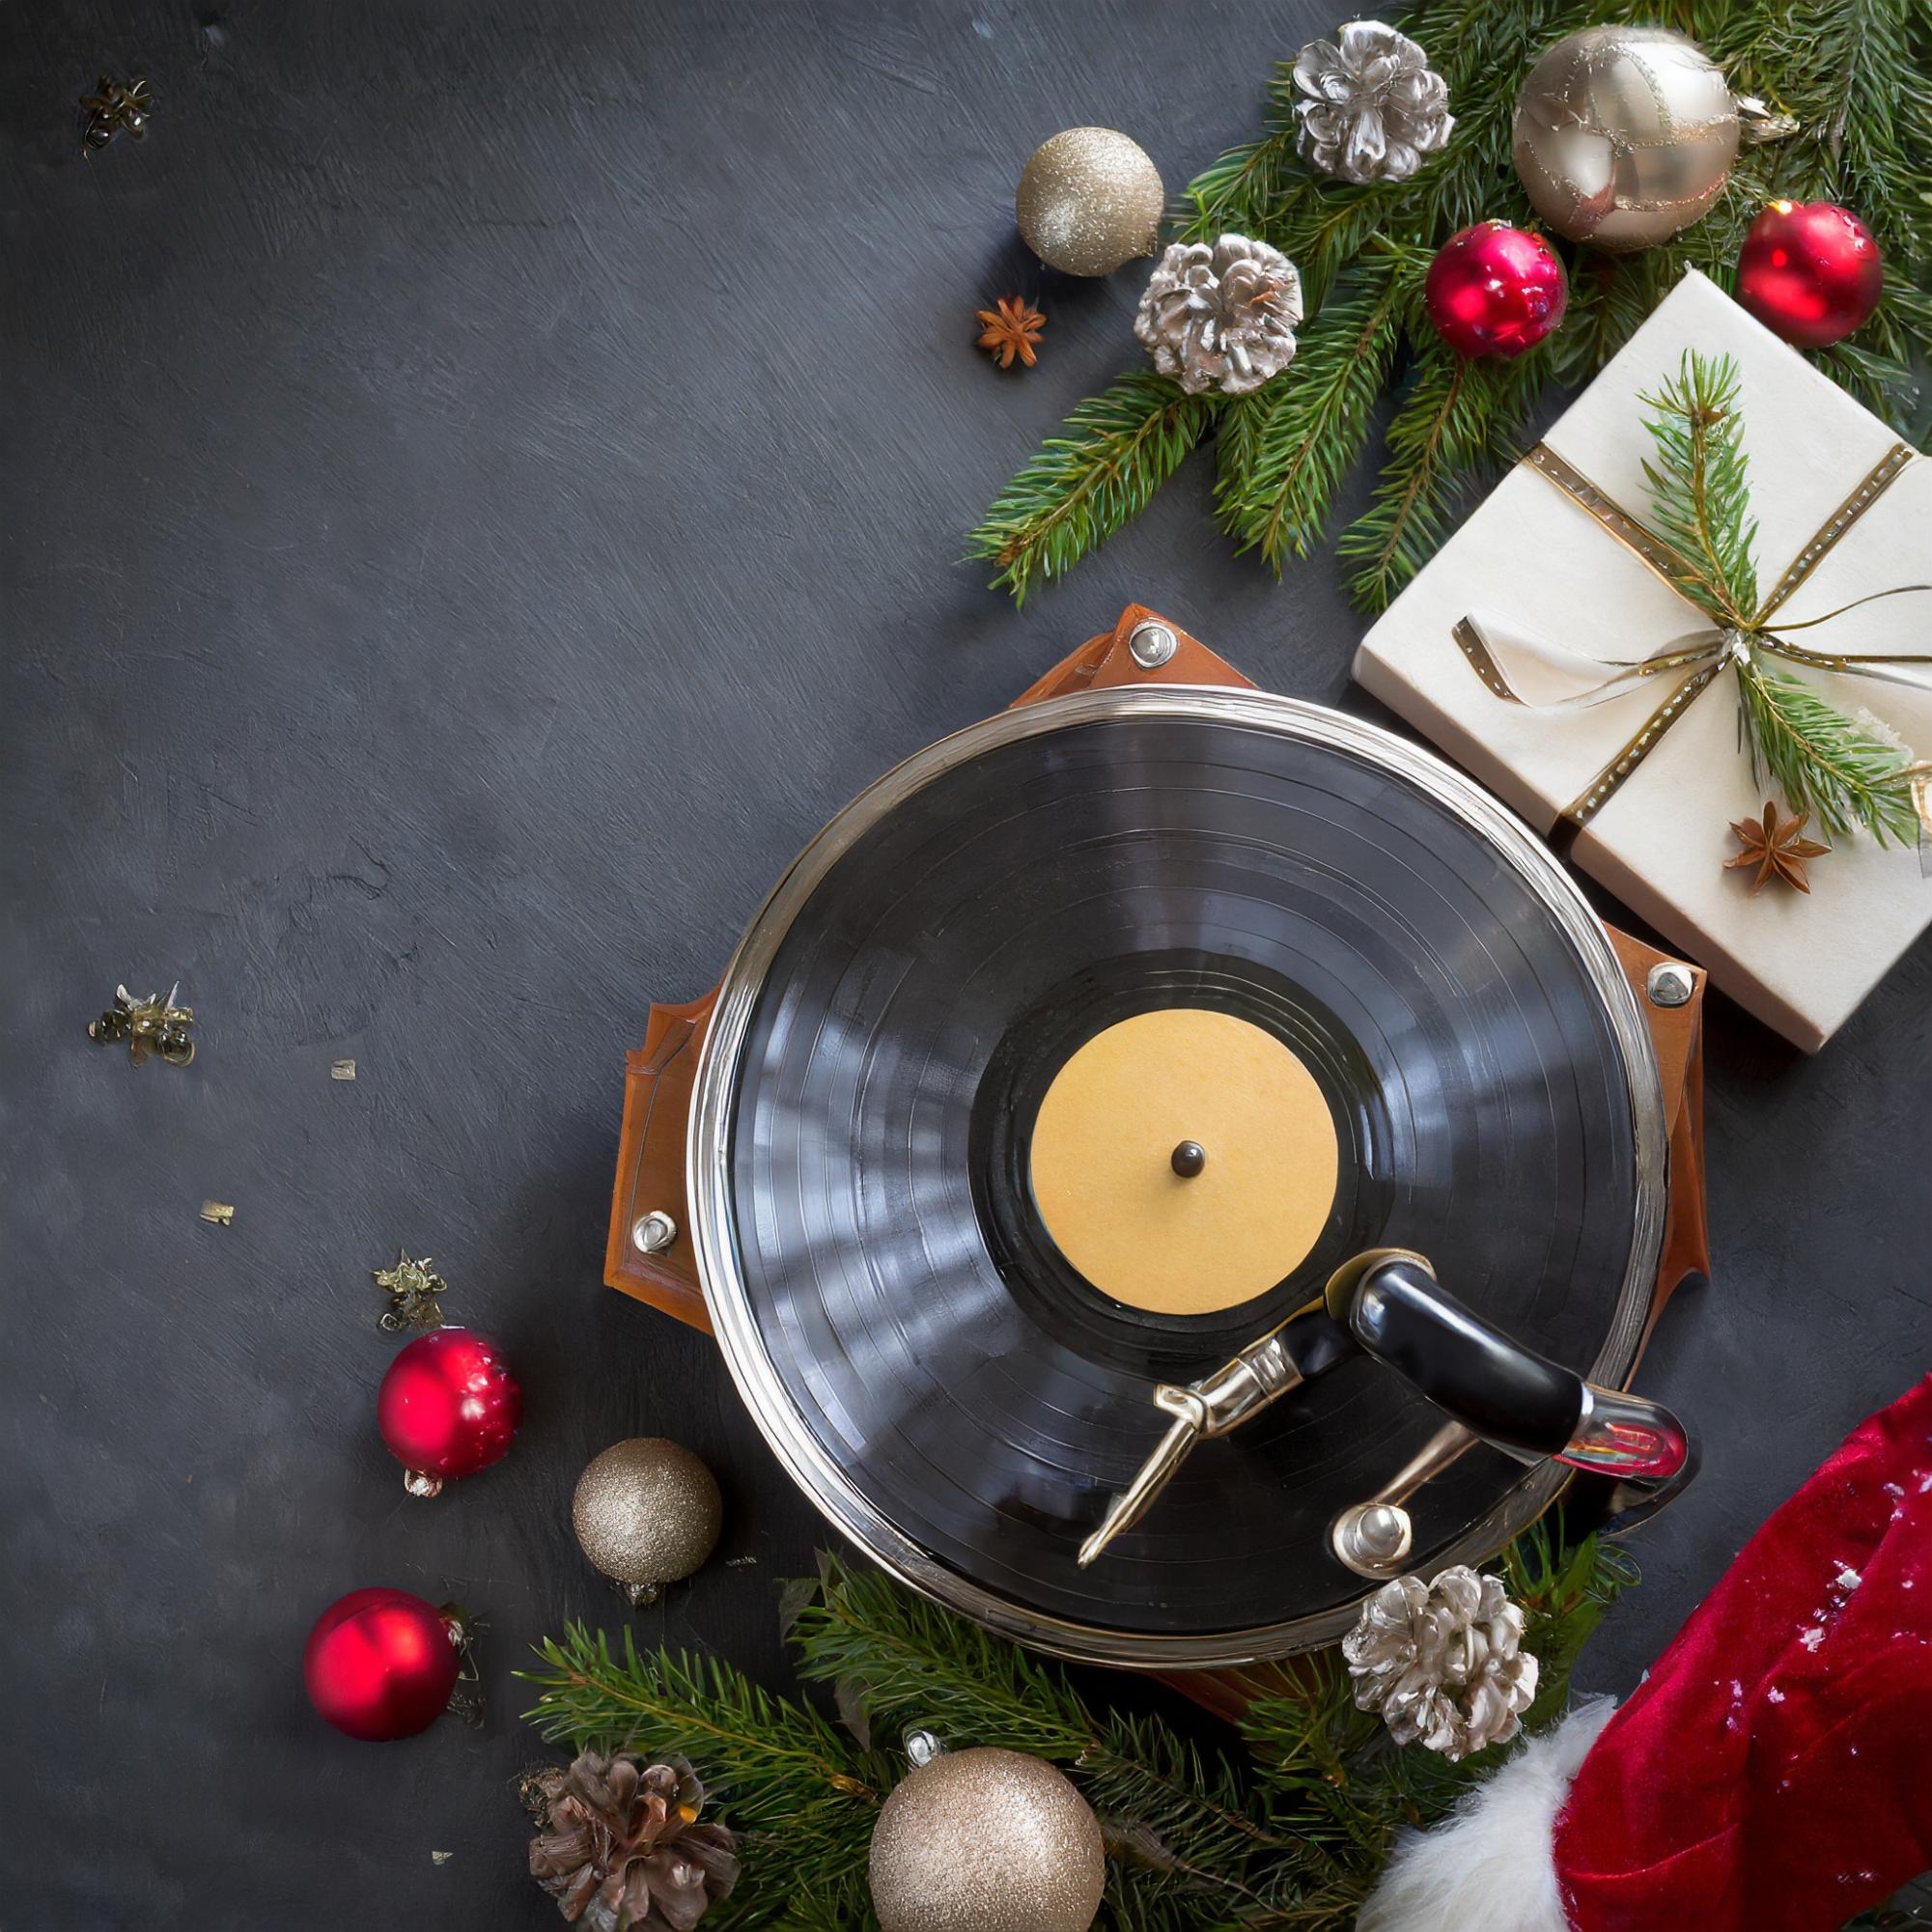 Top five holiday songs to get you into the Christmas spirit